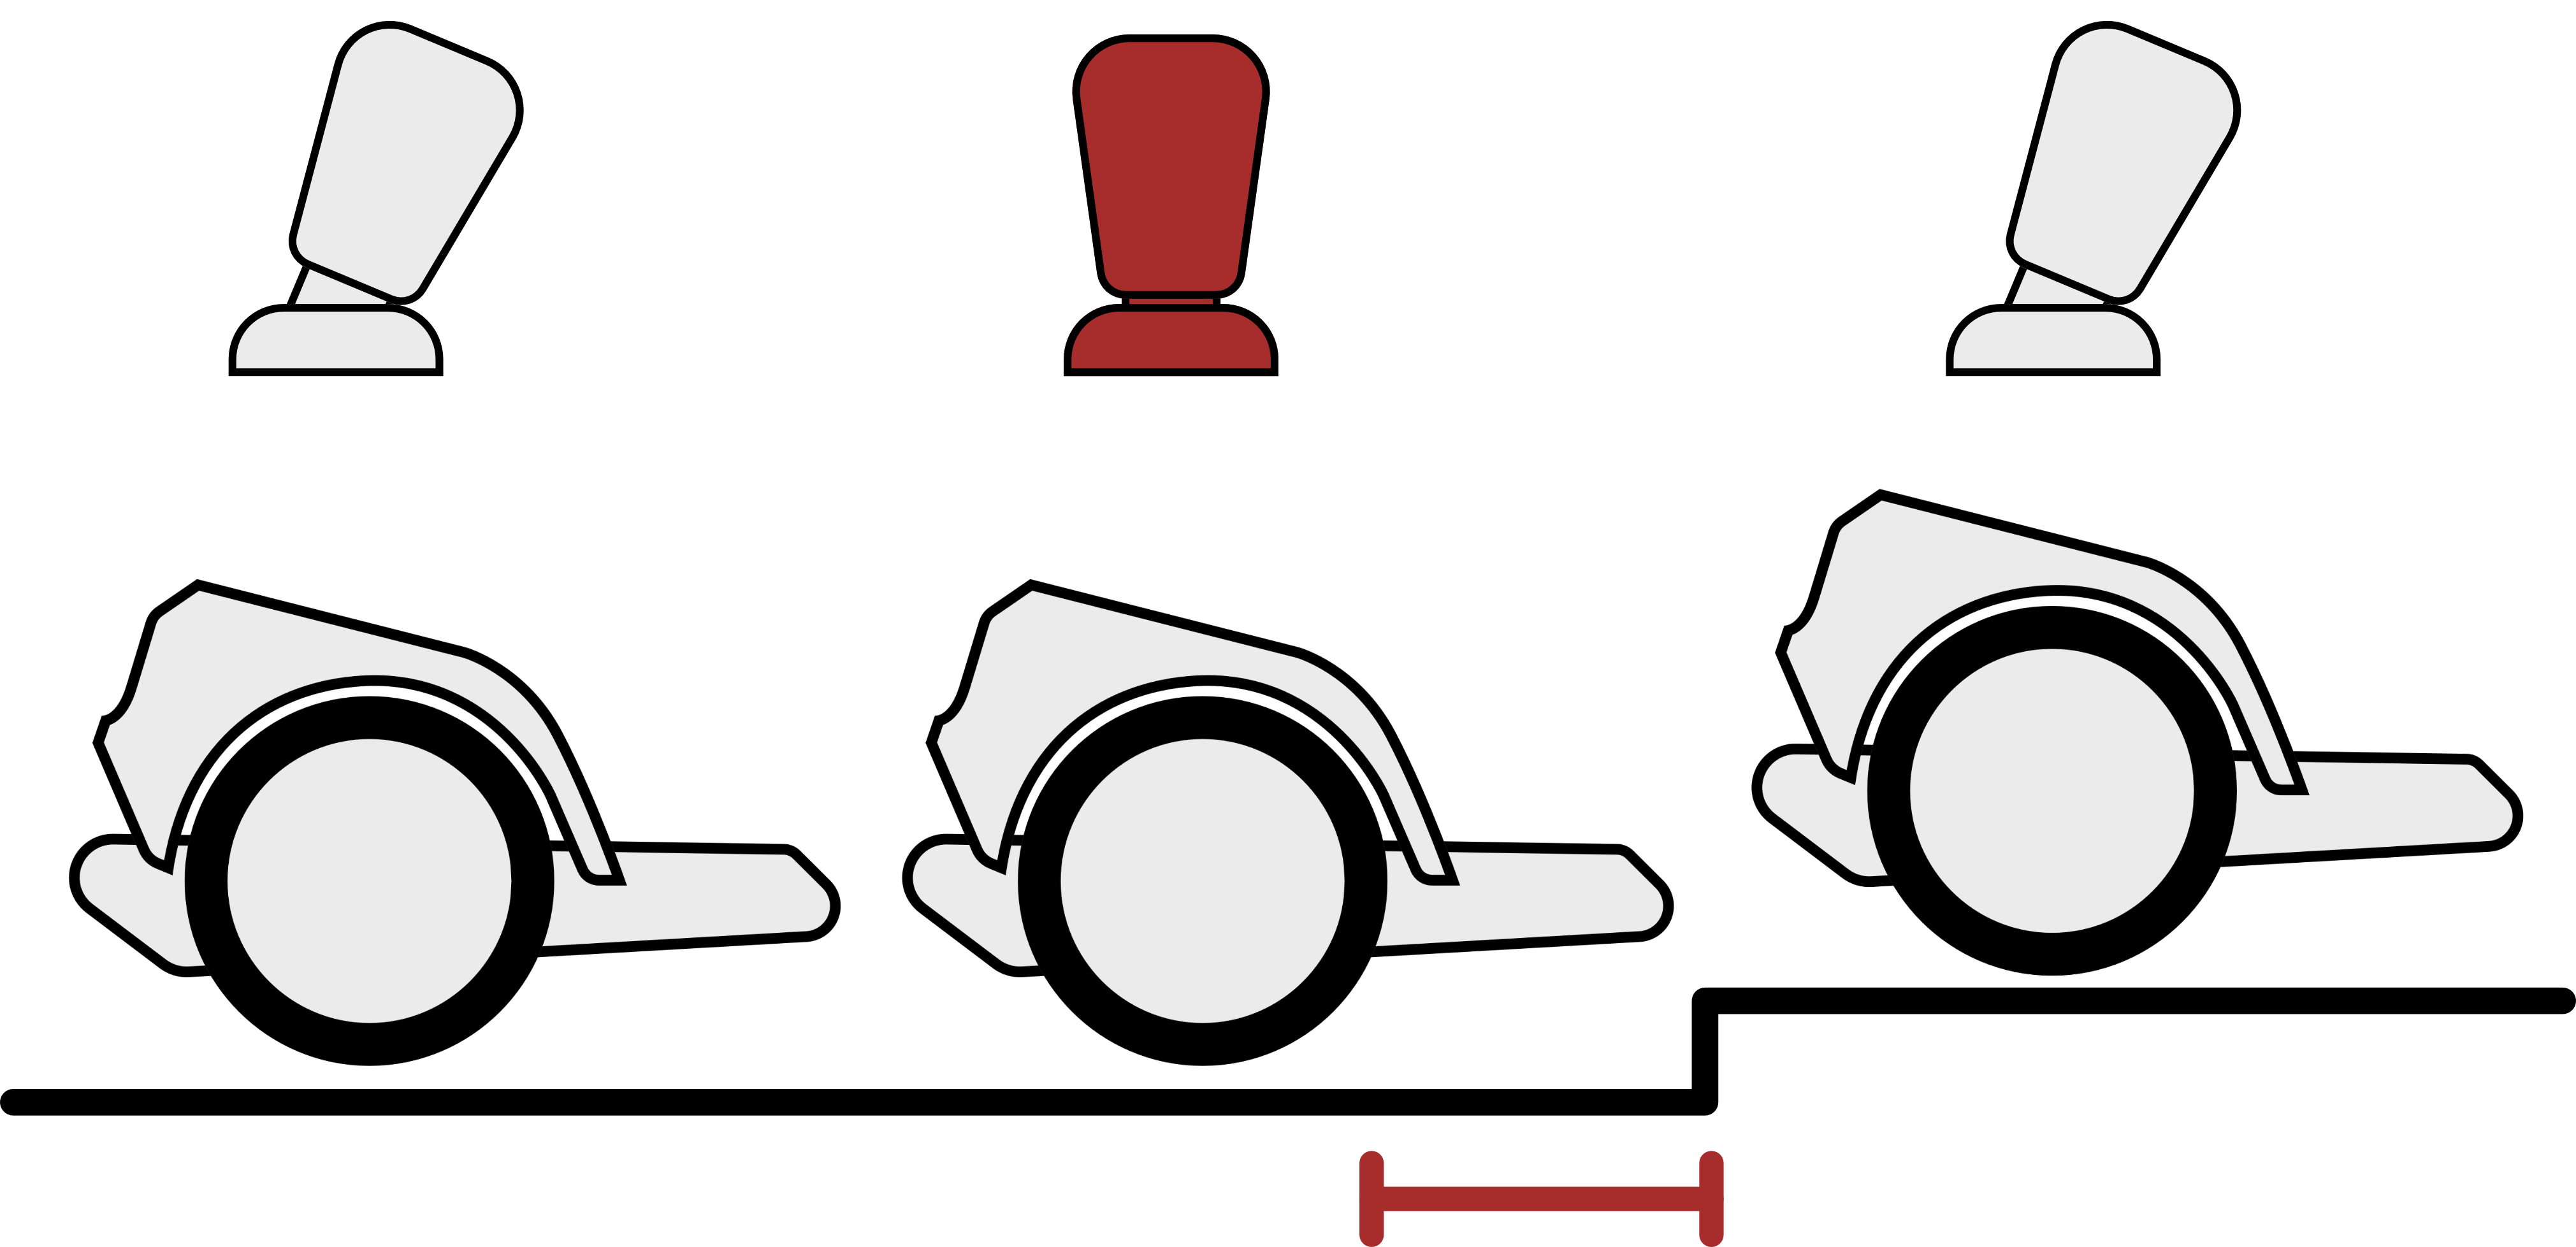 Driving up thresholds: Shortly before the main wheel reaches the threshold, the joystick should be briefly released (brought to the middle position).